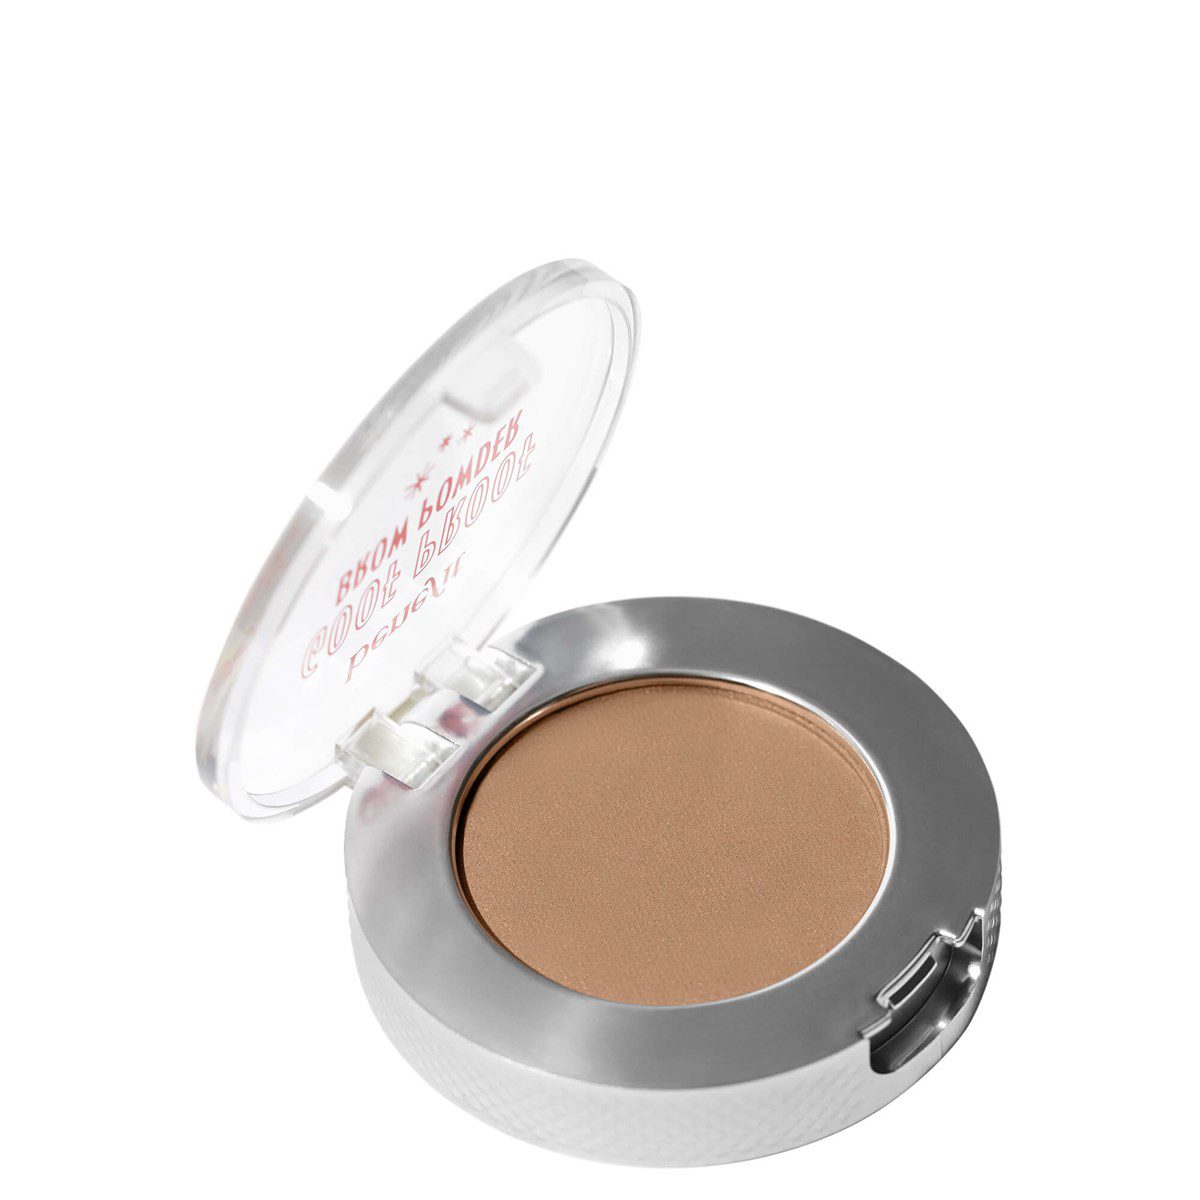 et_goofproofbrowpowder_product_open_shade2